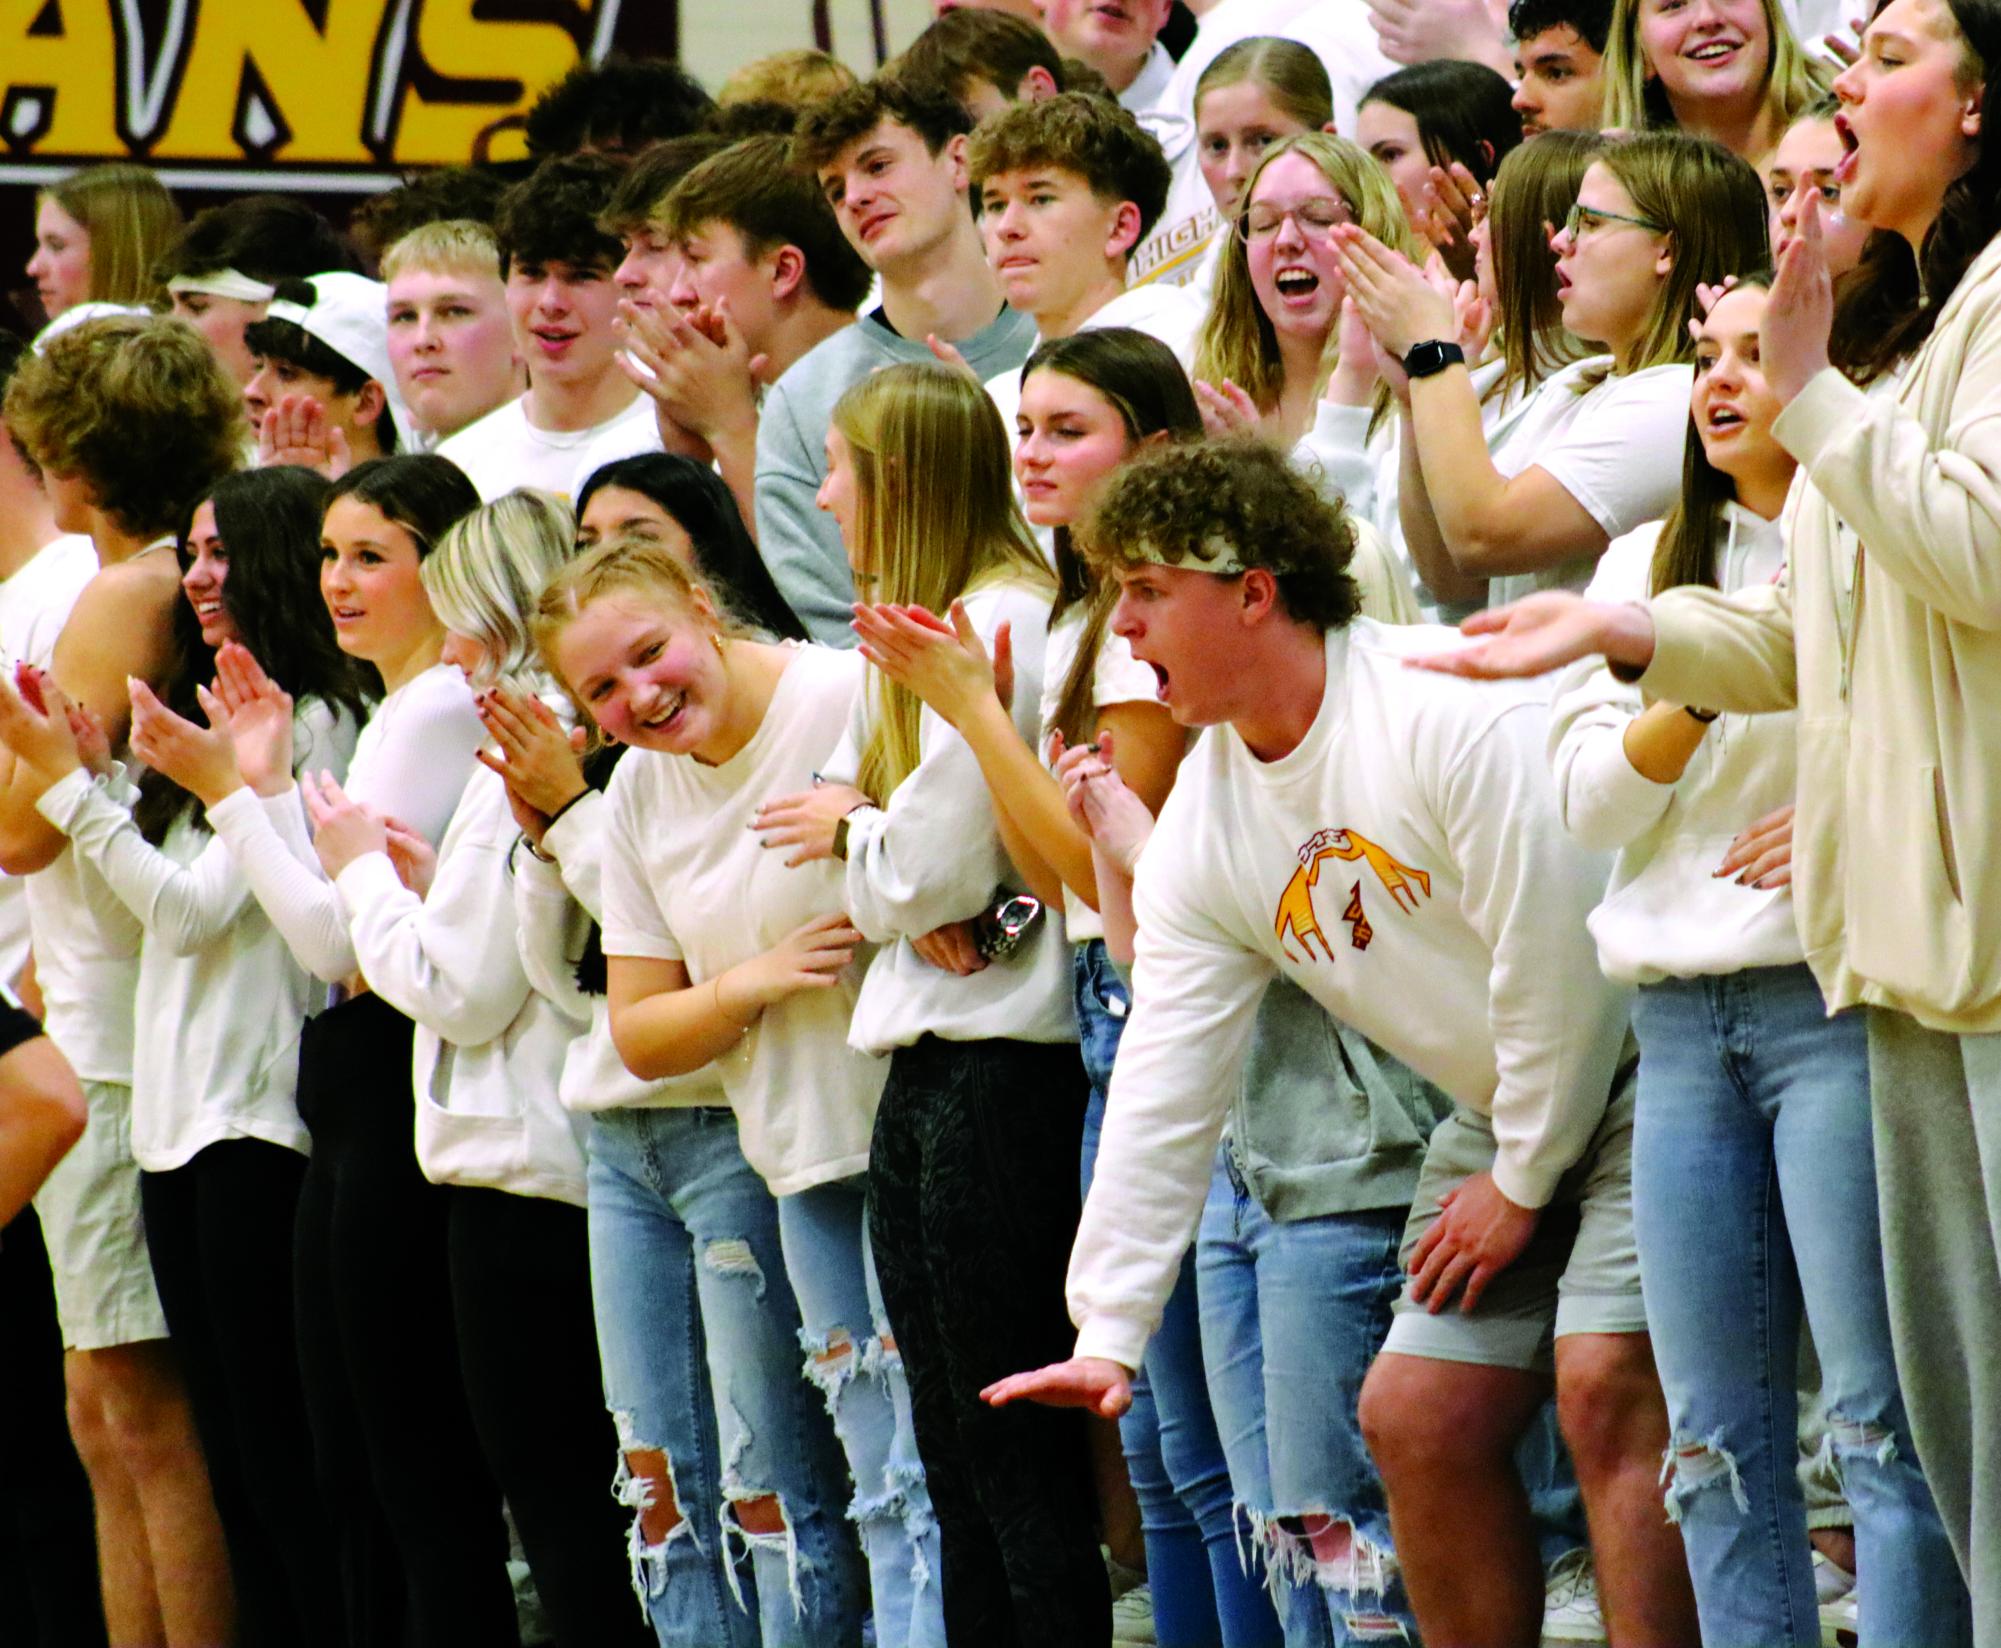 Crowd of Hays High students show their pride at a boys basketball game against our rivals, Great Bend. This has been a long standing tradition of students to wear white when playing this team.